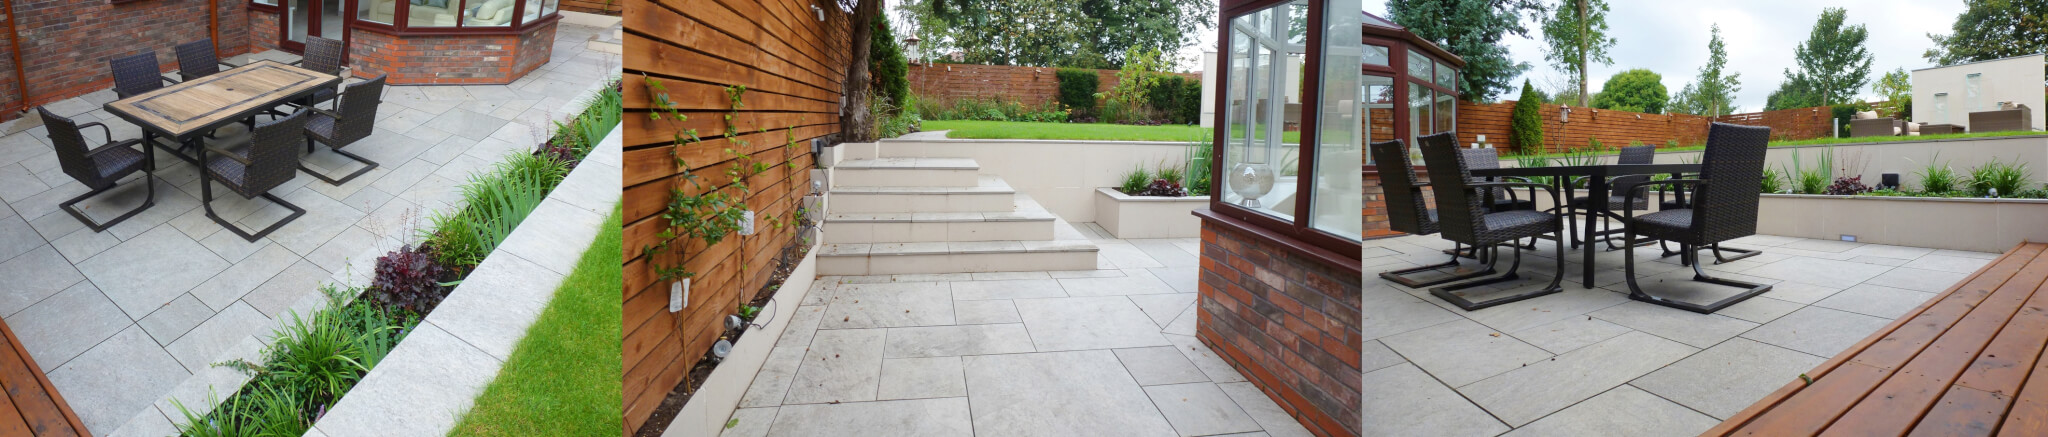 Porcelain Paving Installers Cheshire